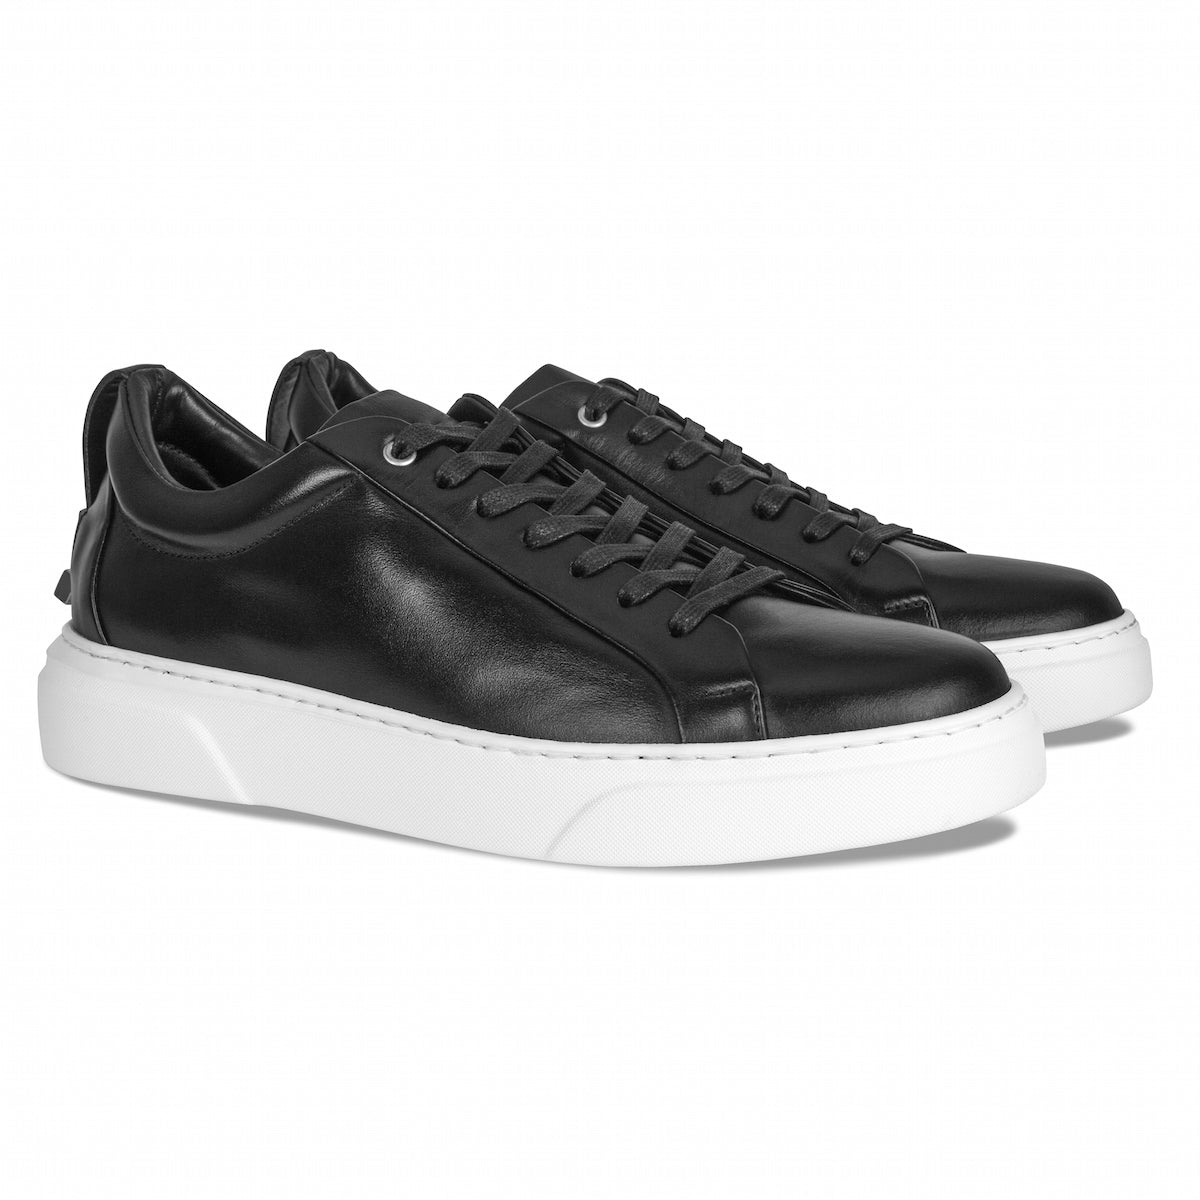 Buy online CLT Stylish Sneakers Shoes For Men